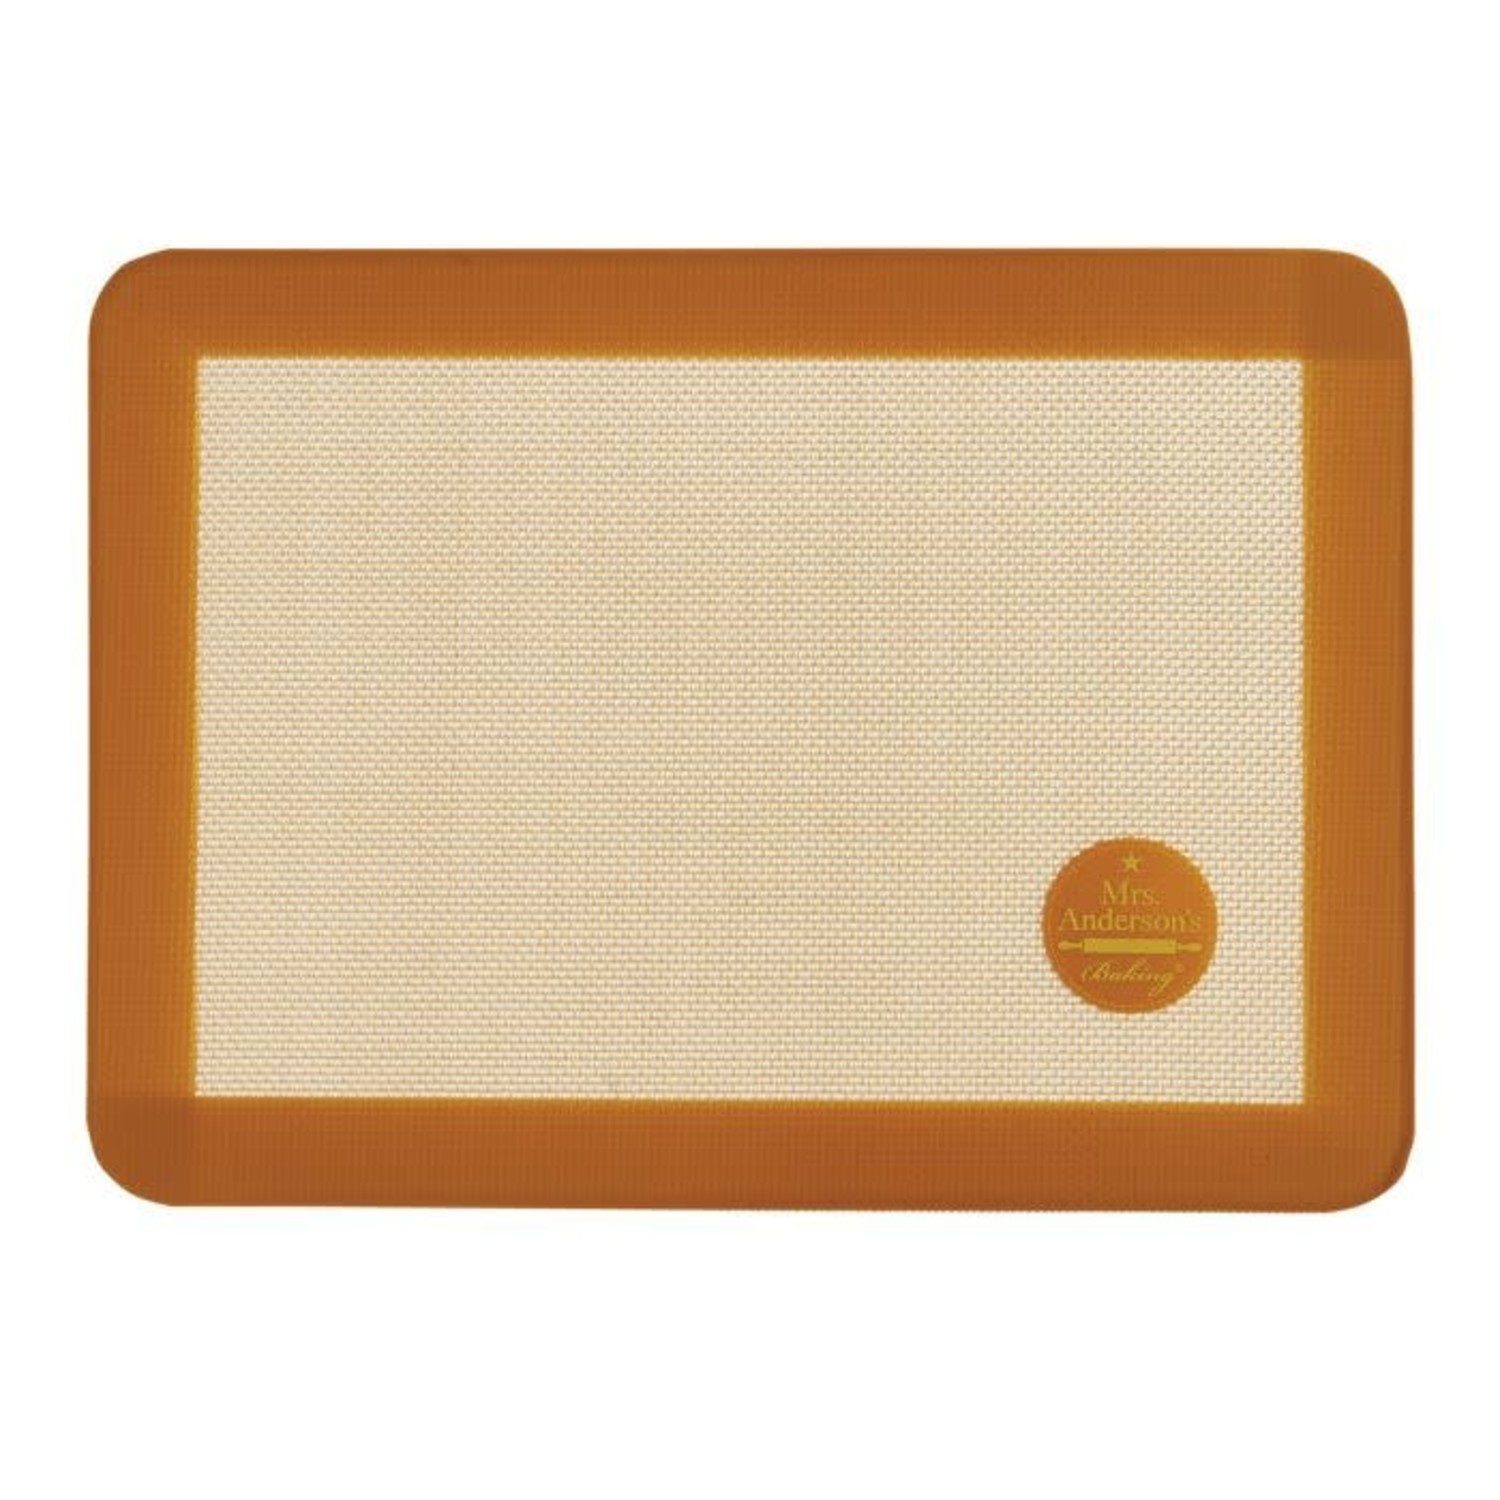 7.8 x 10.8 Toaster Oven Silicone Baking Mat - Whisk